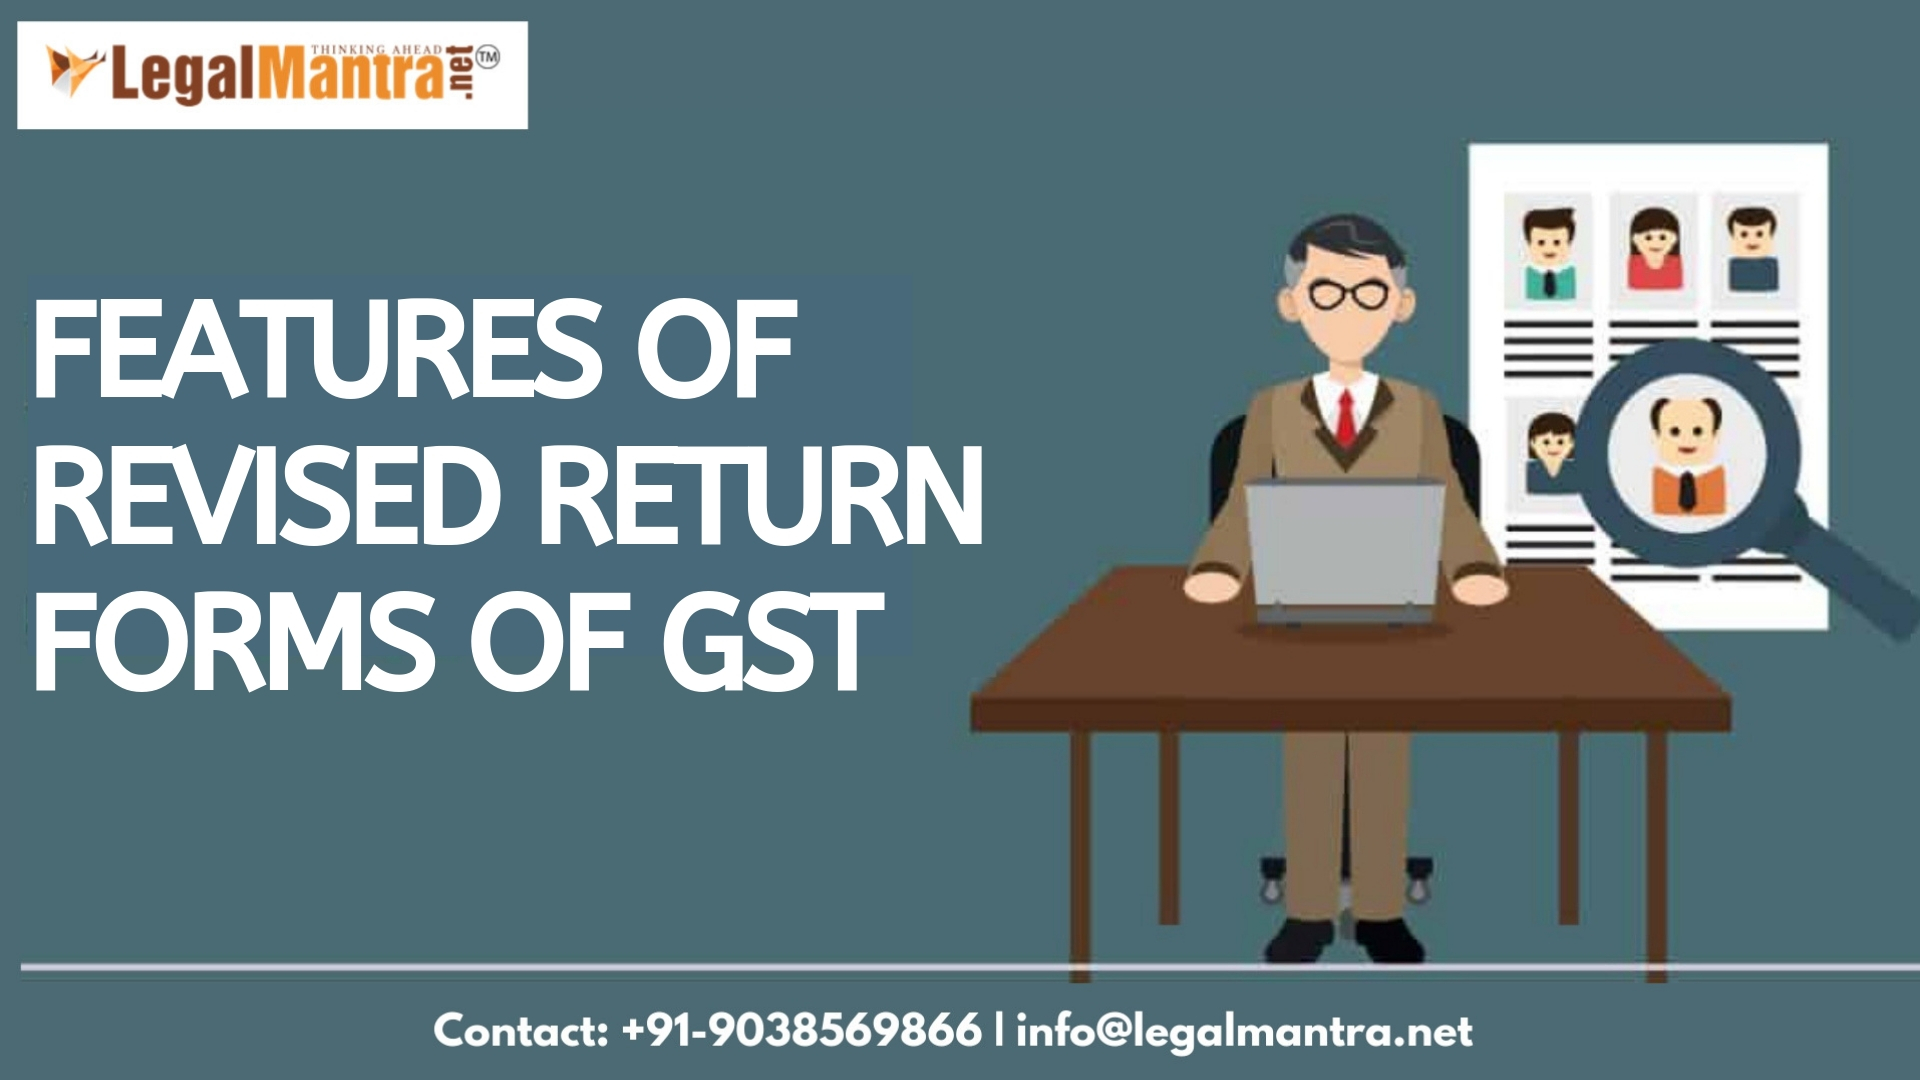 Features of Revised Return Forms of GST